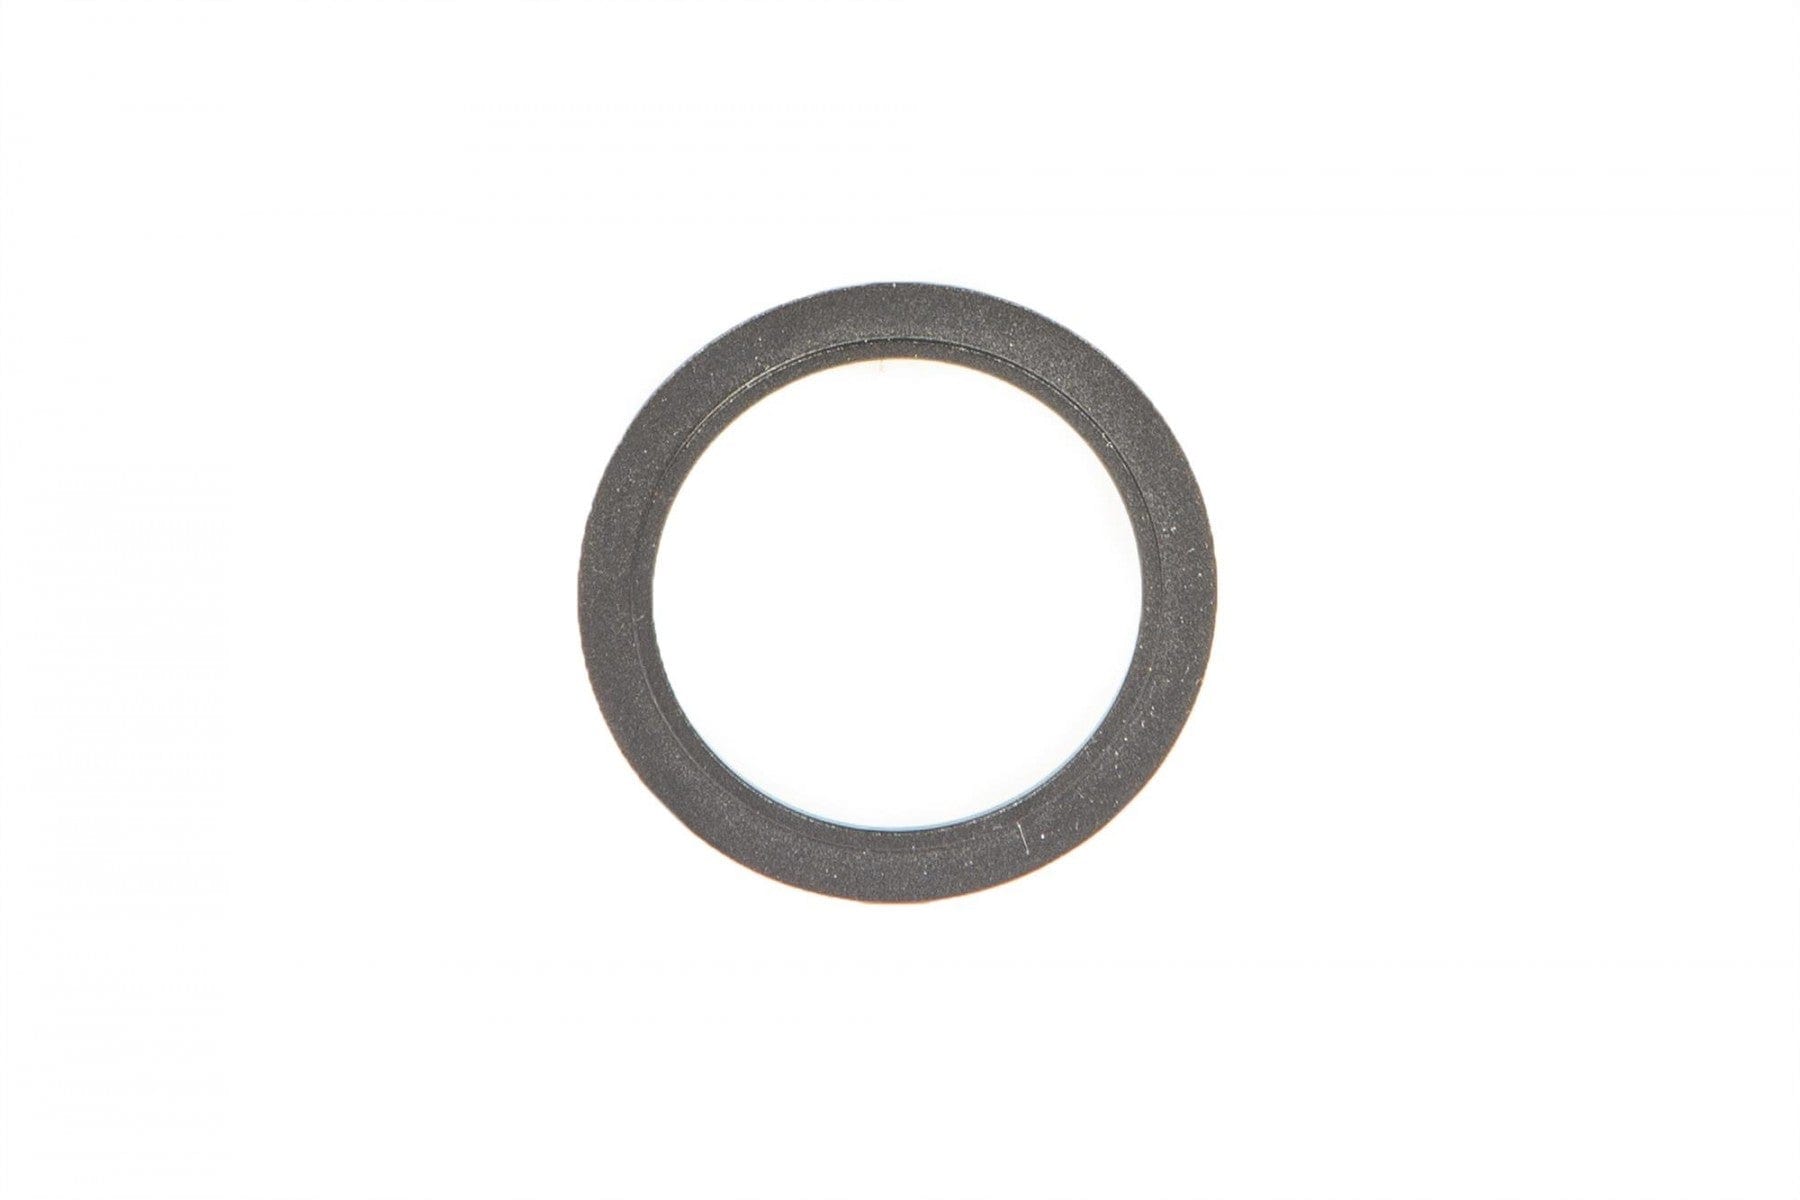 Baader Planetarium Accessory Baader Adjustment-Ring to mount MaxBright II Binocular and T-2 Star Diagonals/Mirrors (requires use of #2458271) - 2458272